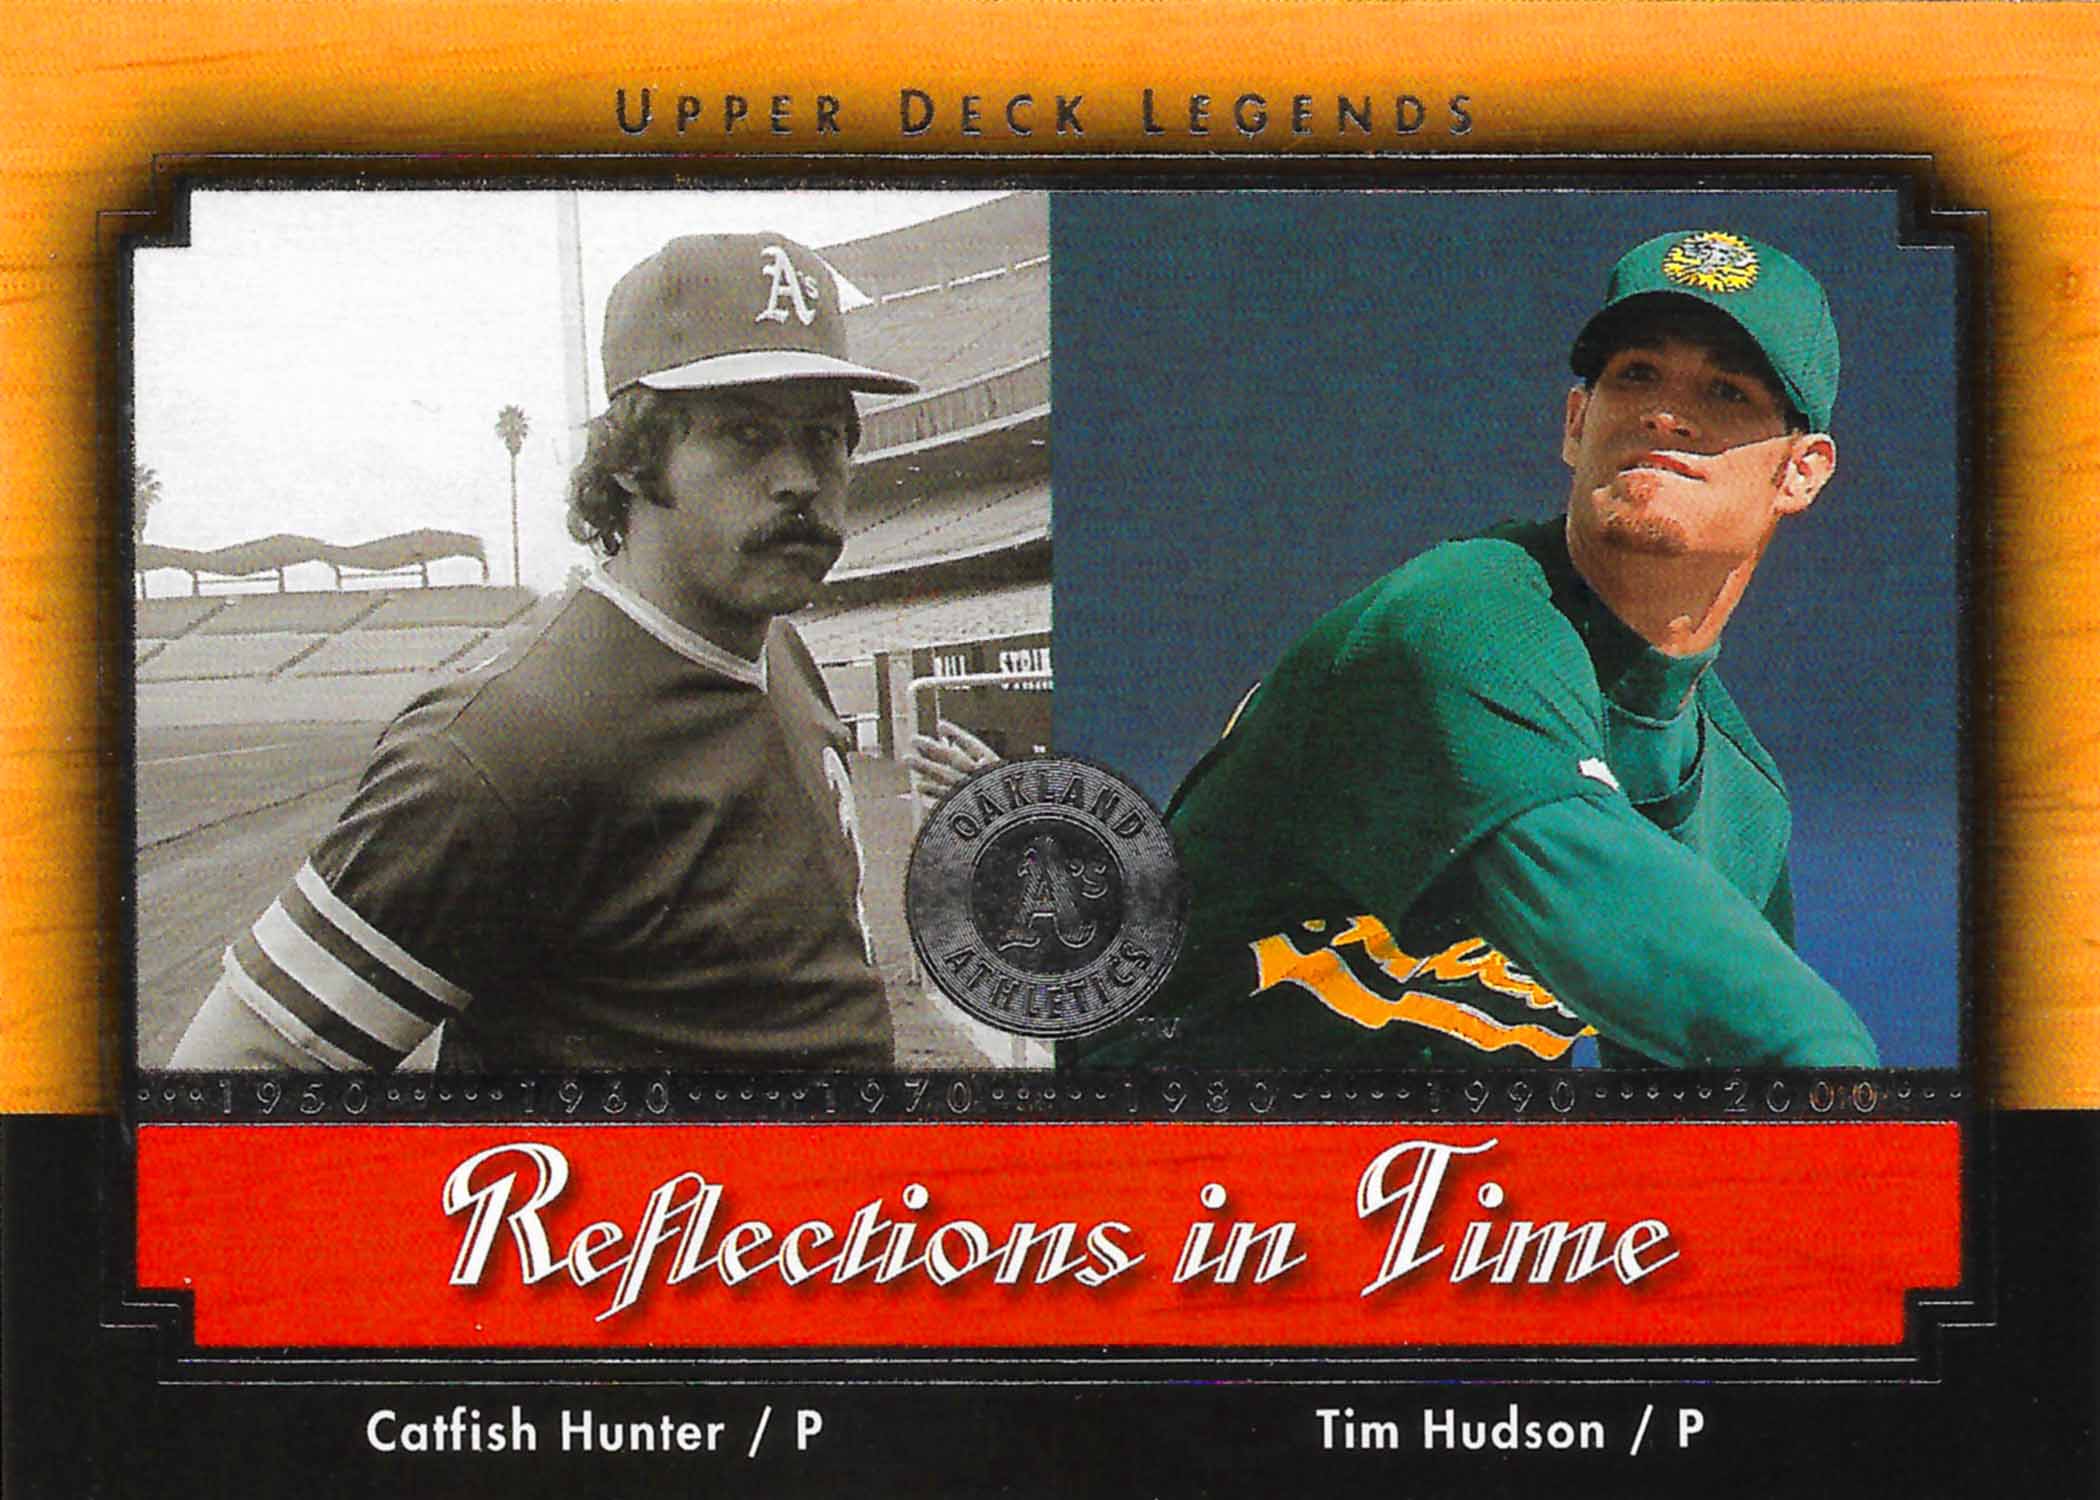 2001 Upper Deck Legends Reflections in Time